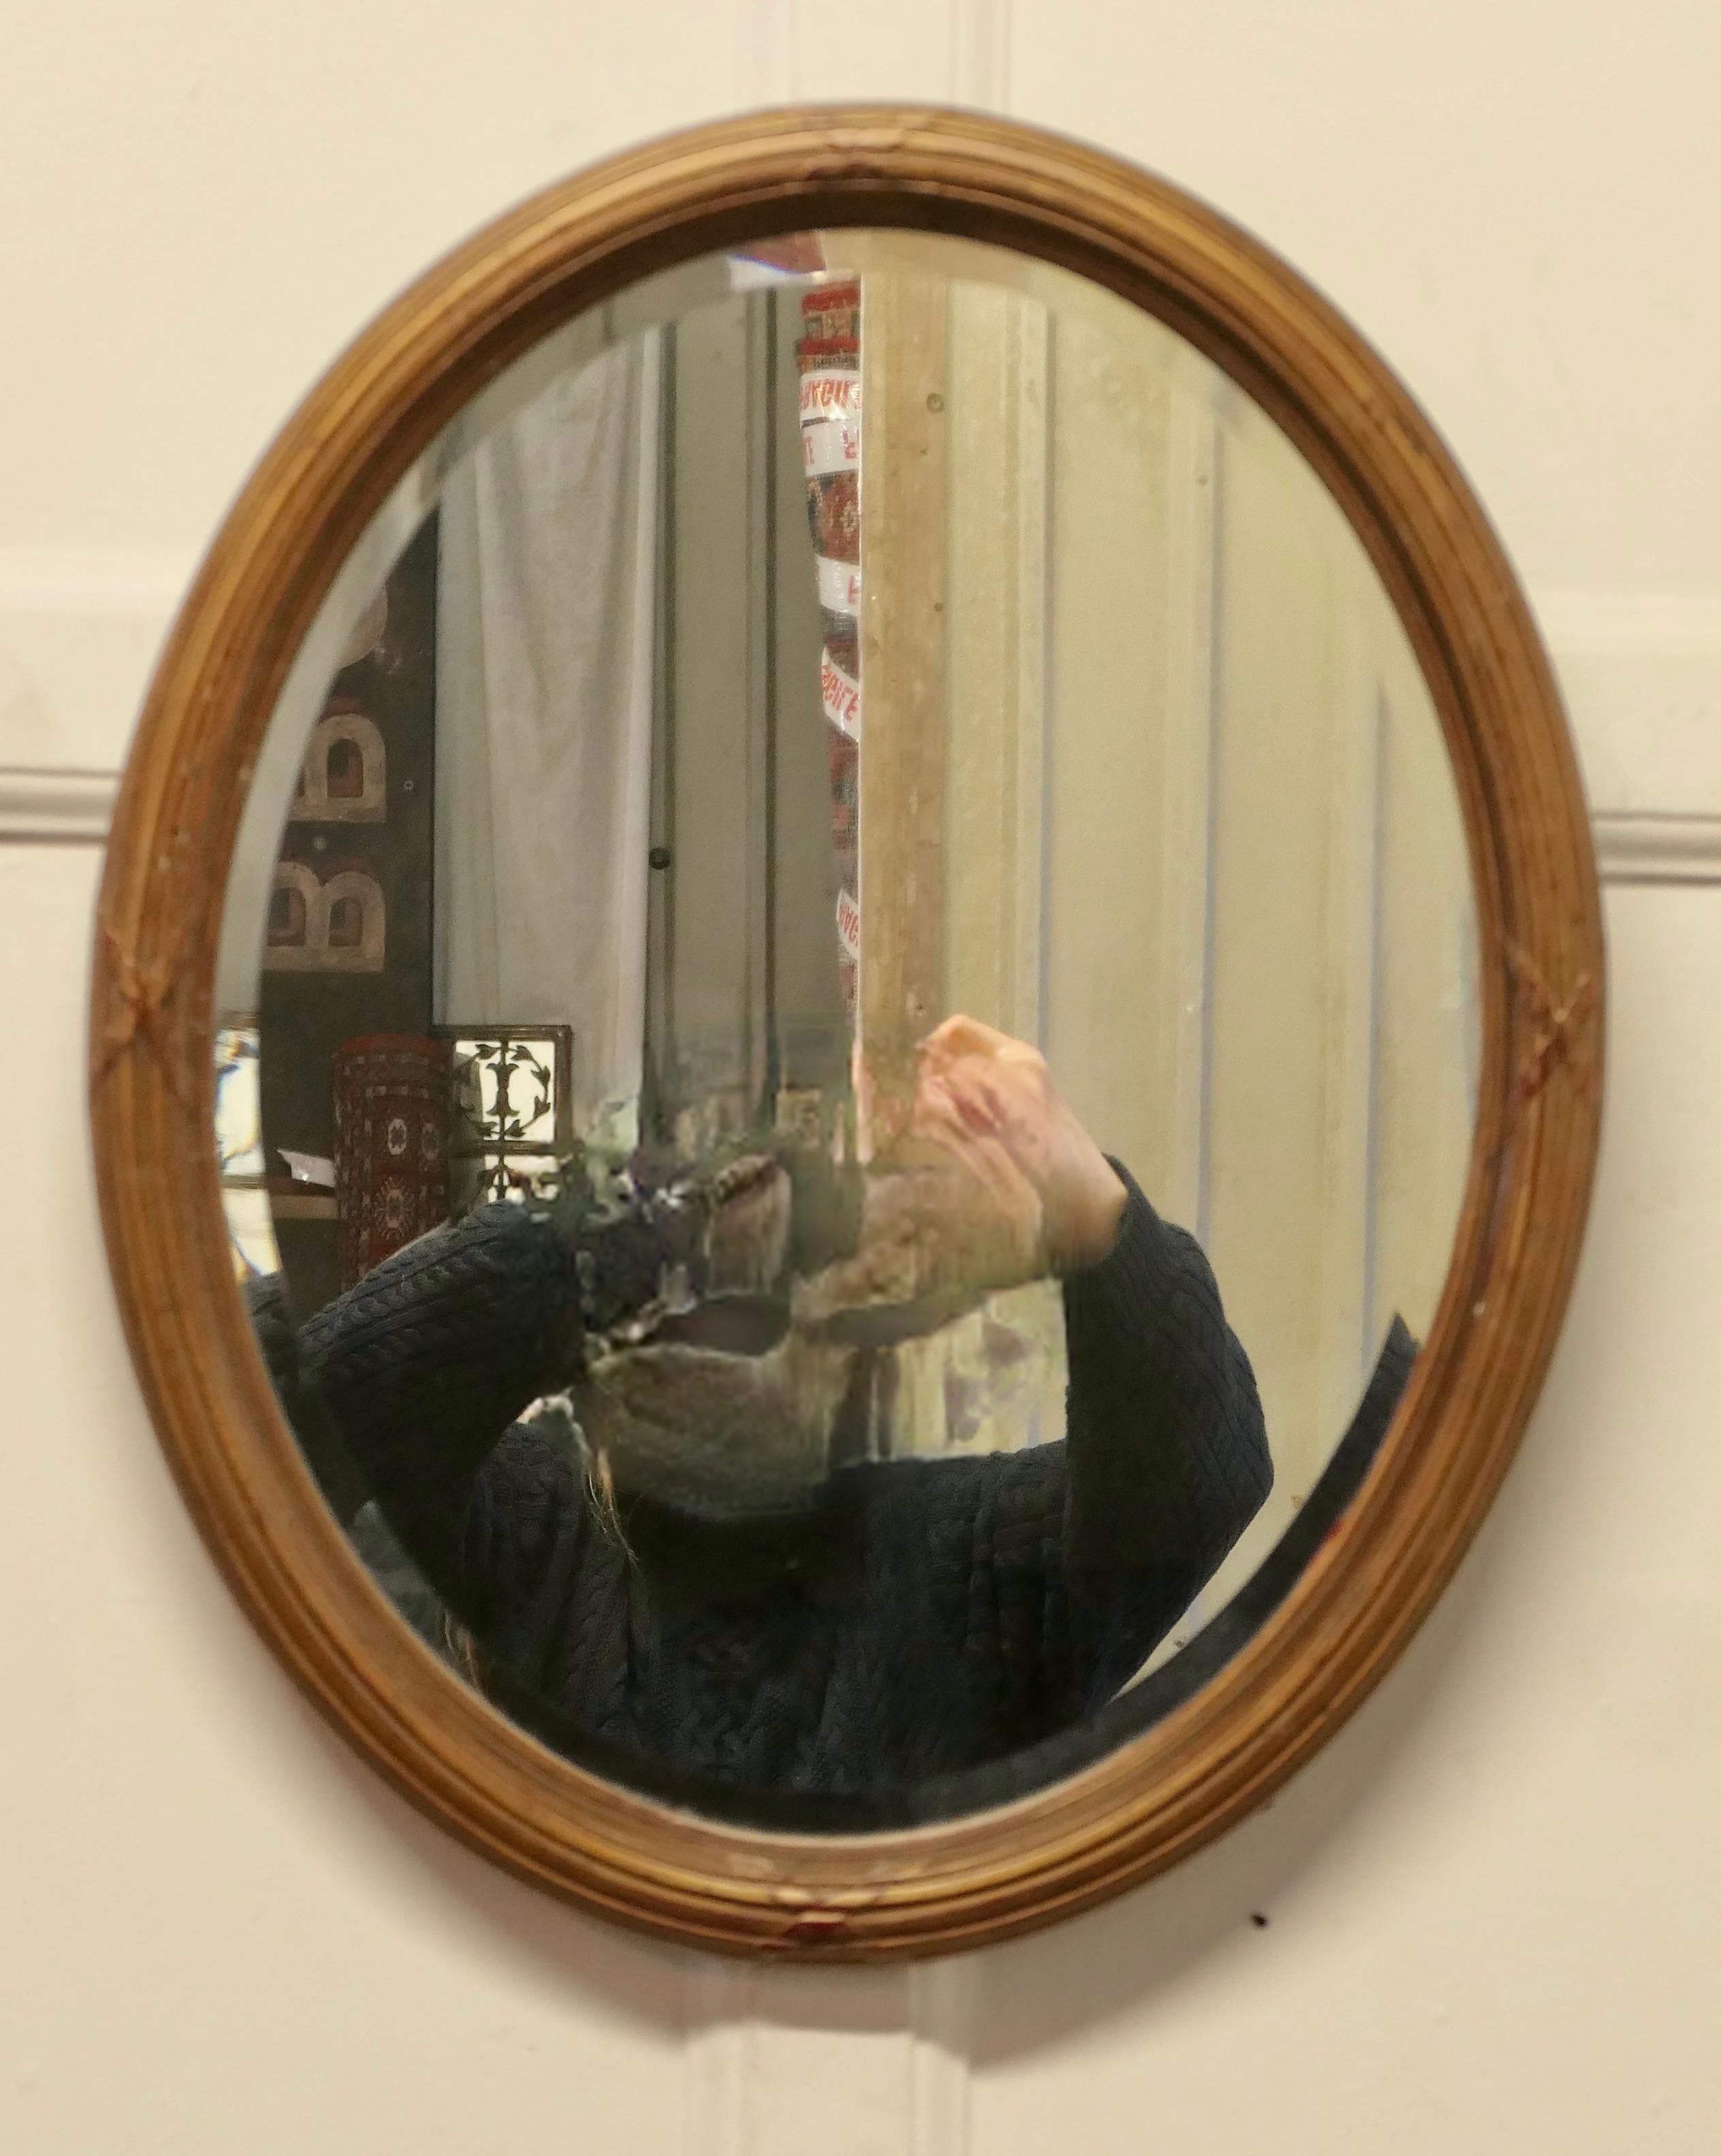 Italian Gilt Oval Mirror

This Mirror has a 1.5” wide moulded oval frame, this has a good dark gilt finish
The Oval frame is in attractive condition as is the original bevelled looking glass
The mirror is 18” wide and 22” tall 
FB23